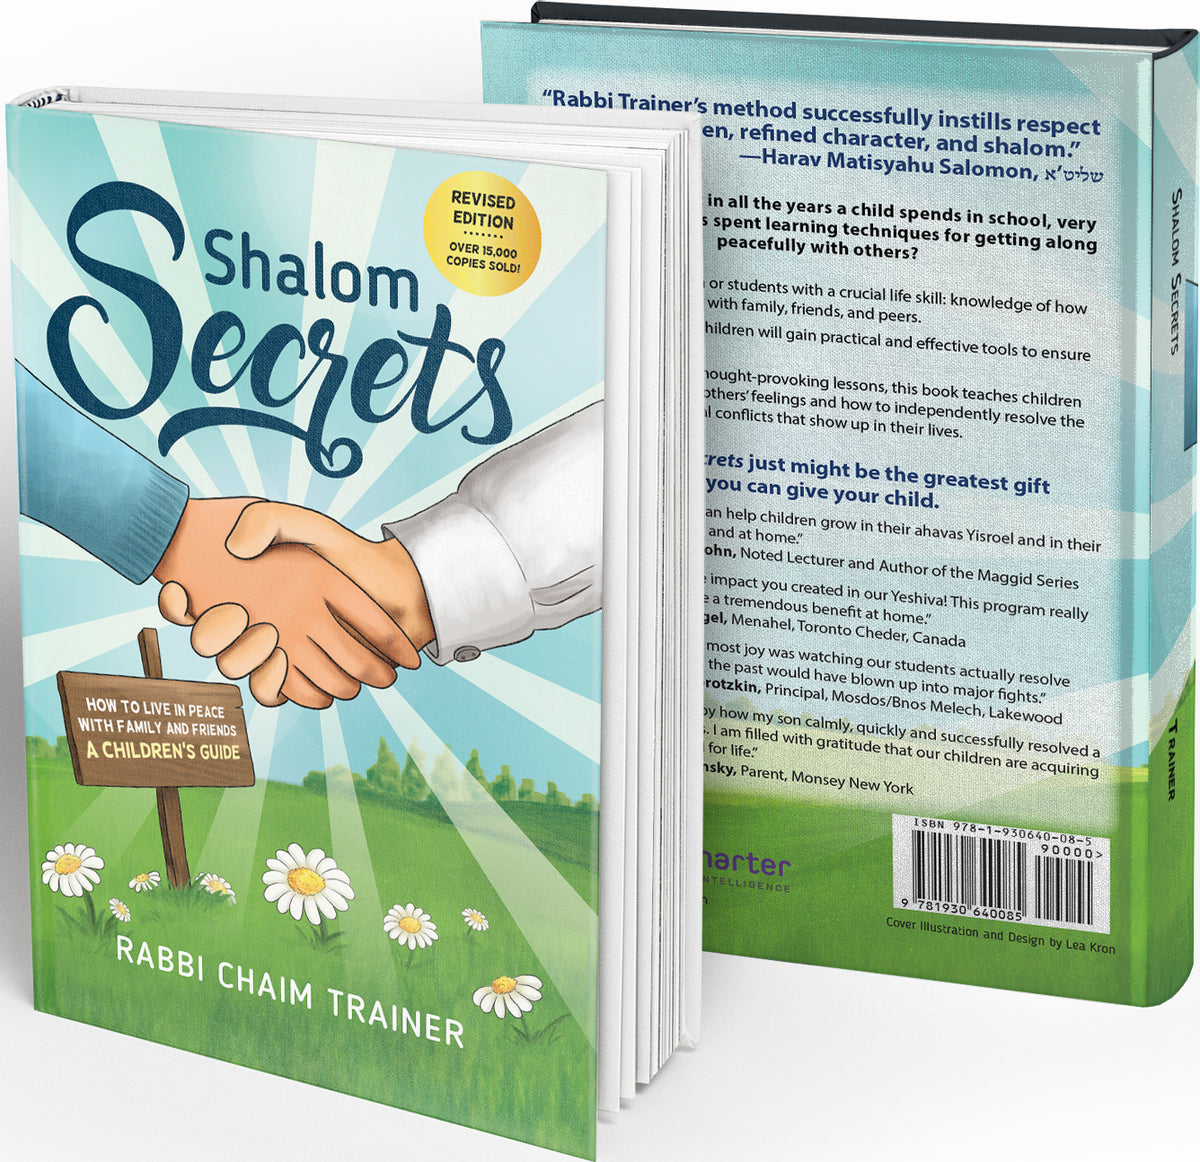 Shalom Secrets book front and back covers, hands of children shaking, beams of light across sky, grass and daisies, wooden sign says How To Live in Peace with Friends and Family, a Children's Guide author's name Rabbi Chaim Trainer